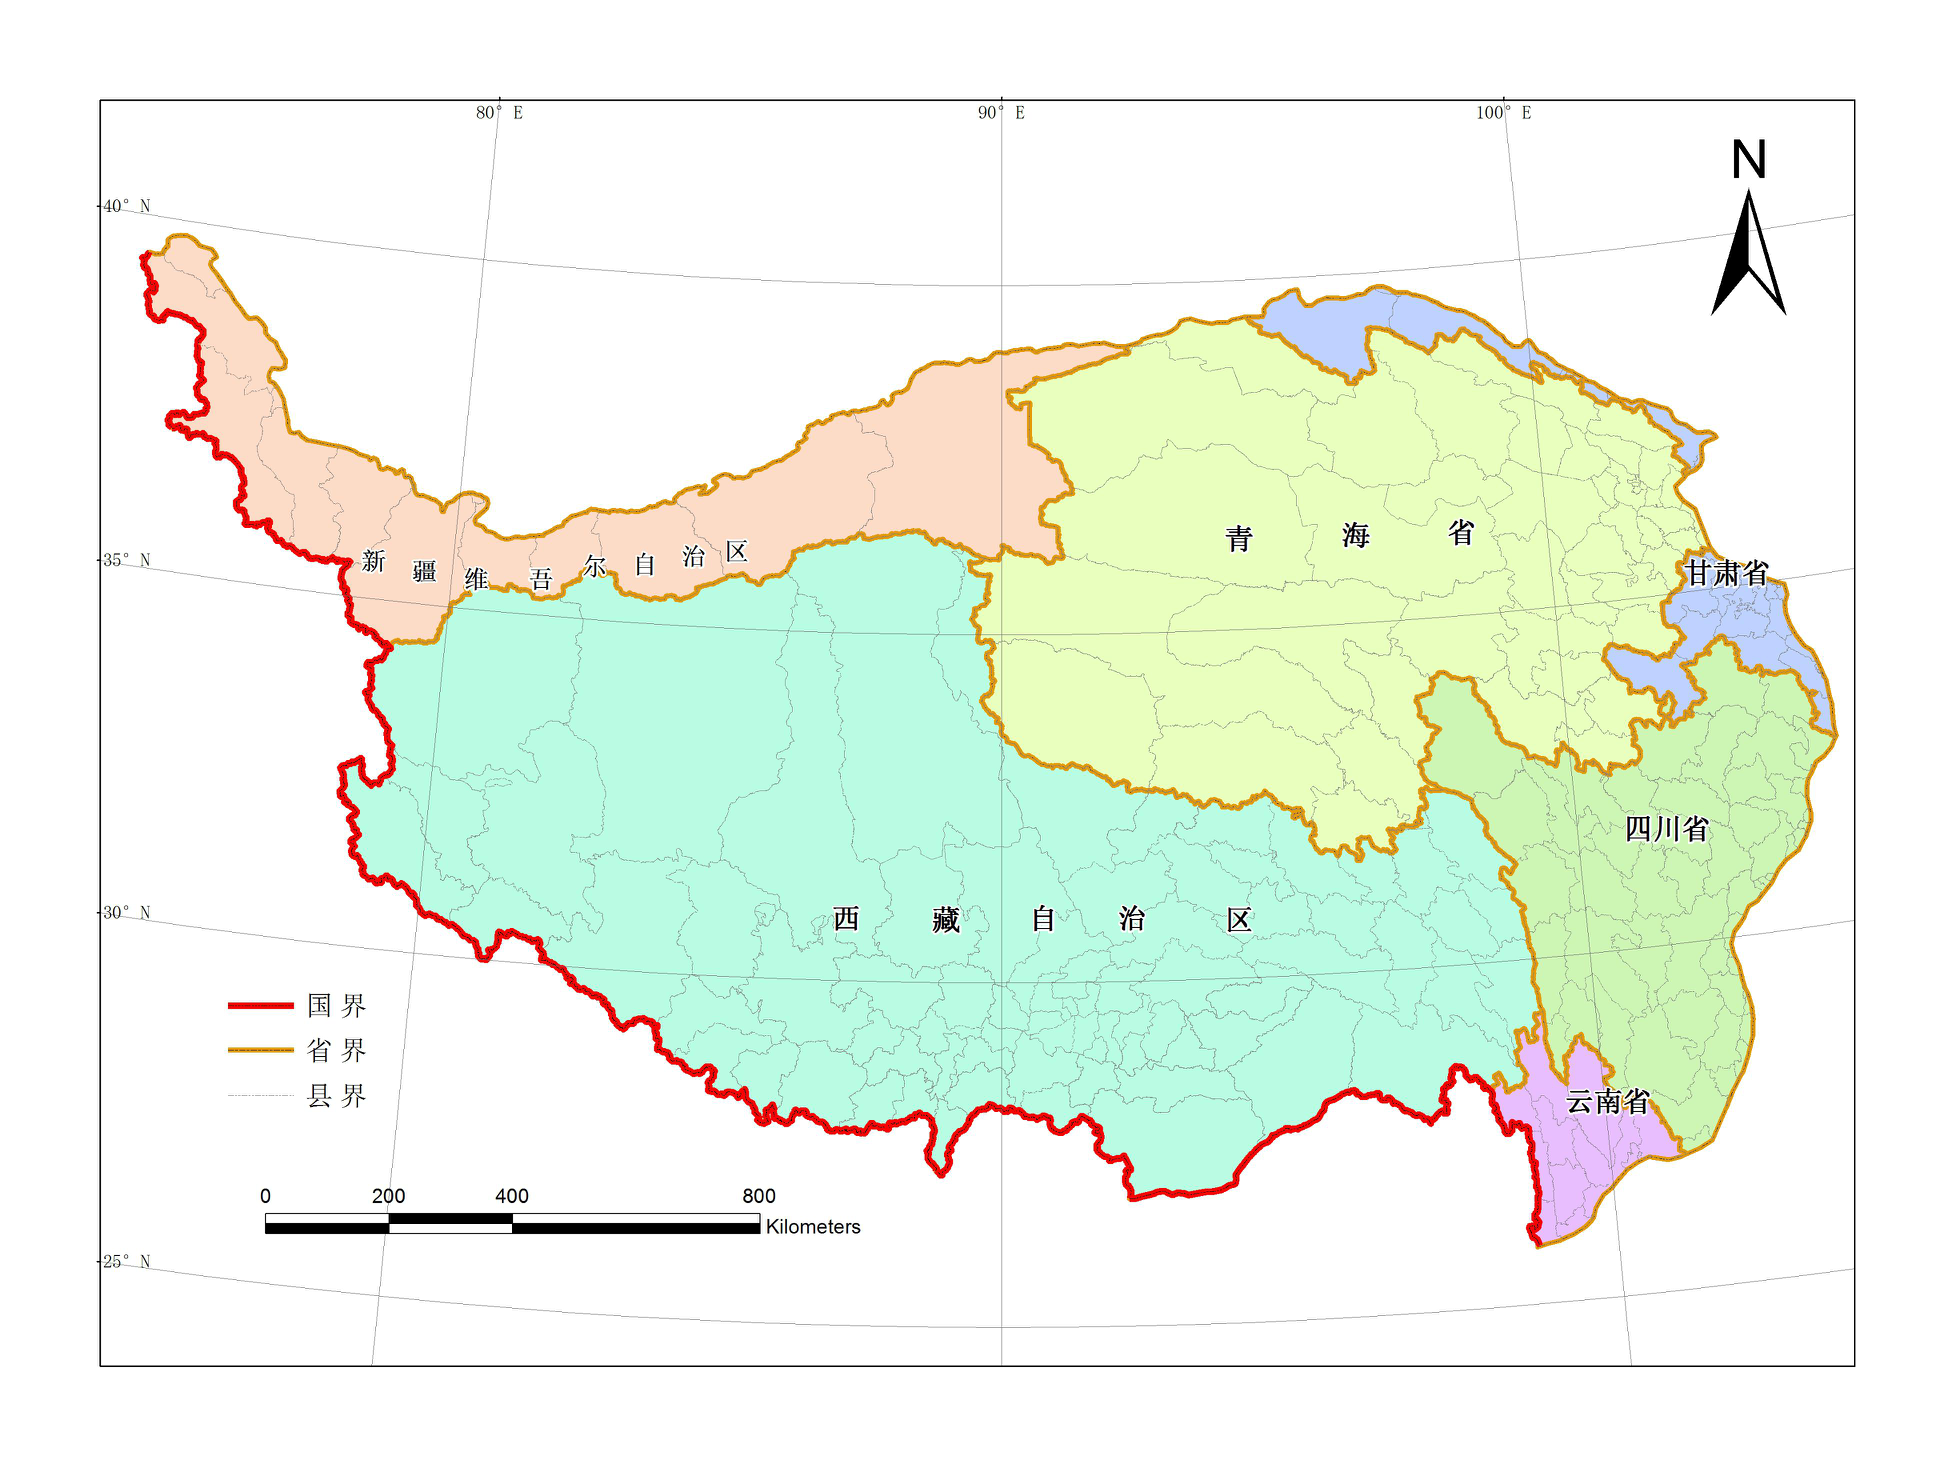 Administrative boundaries data at 1:1000 000 scale over the Tibetan Plateau (2017)